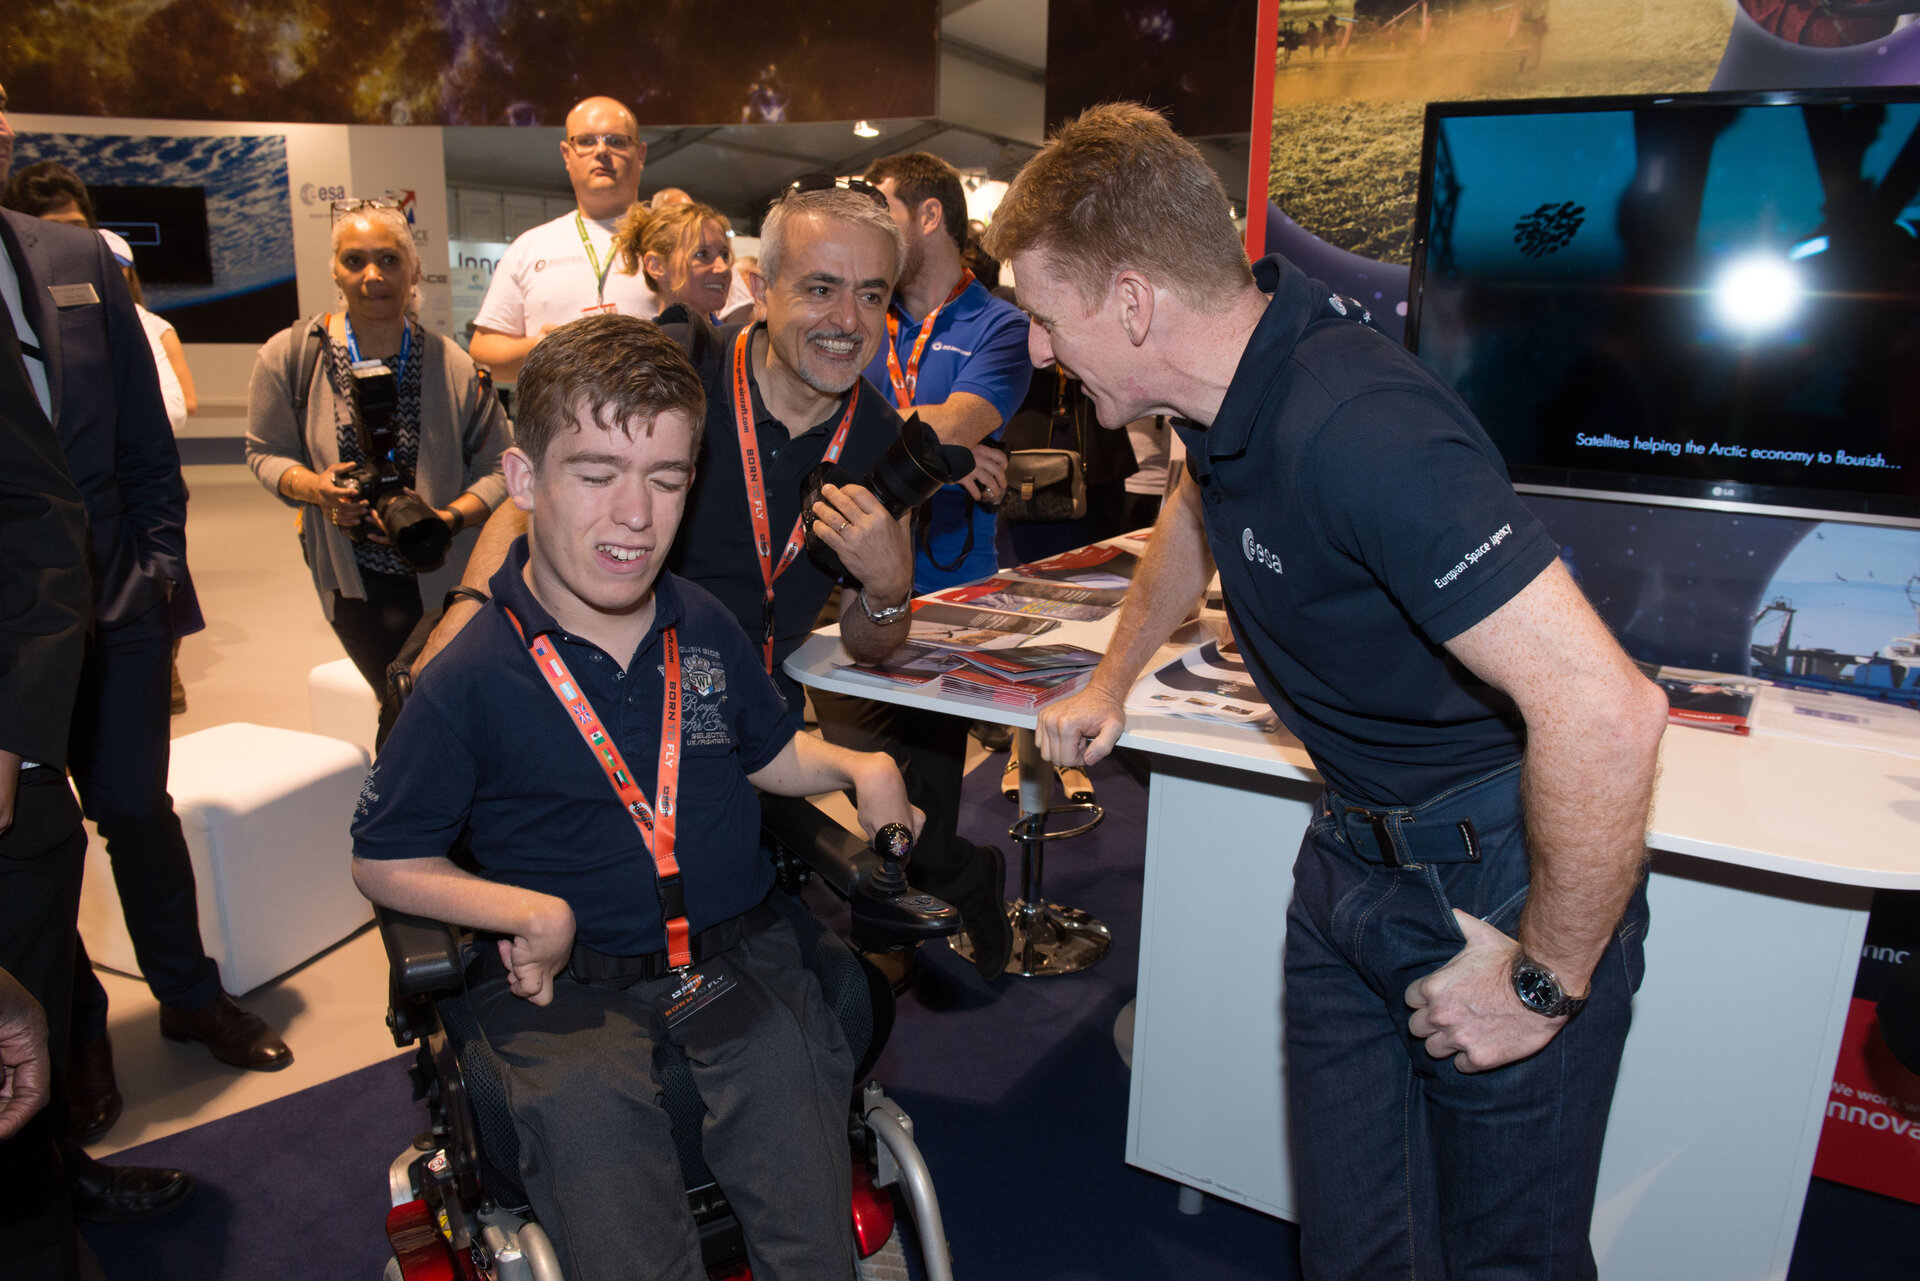 Tim Peake meeting Alessandro at Futures Day in the ESA Pavilion.